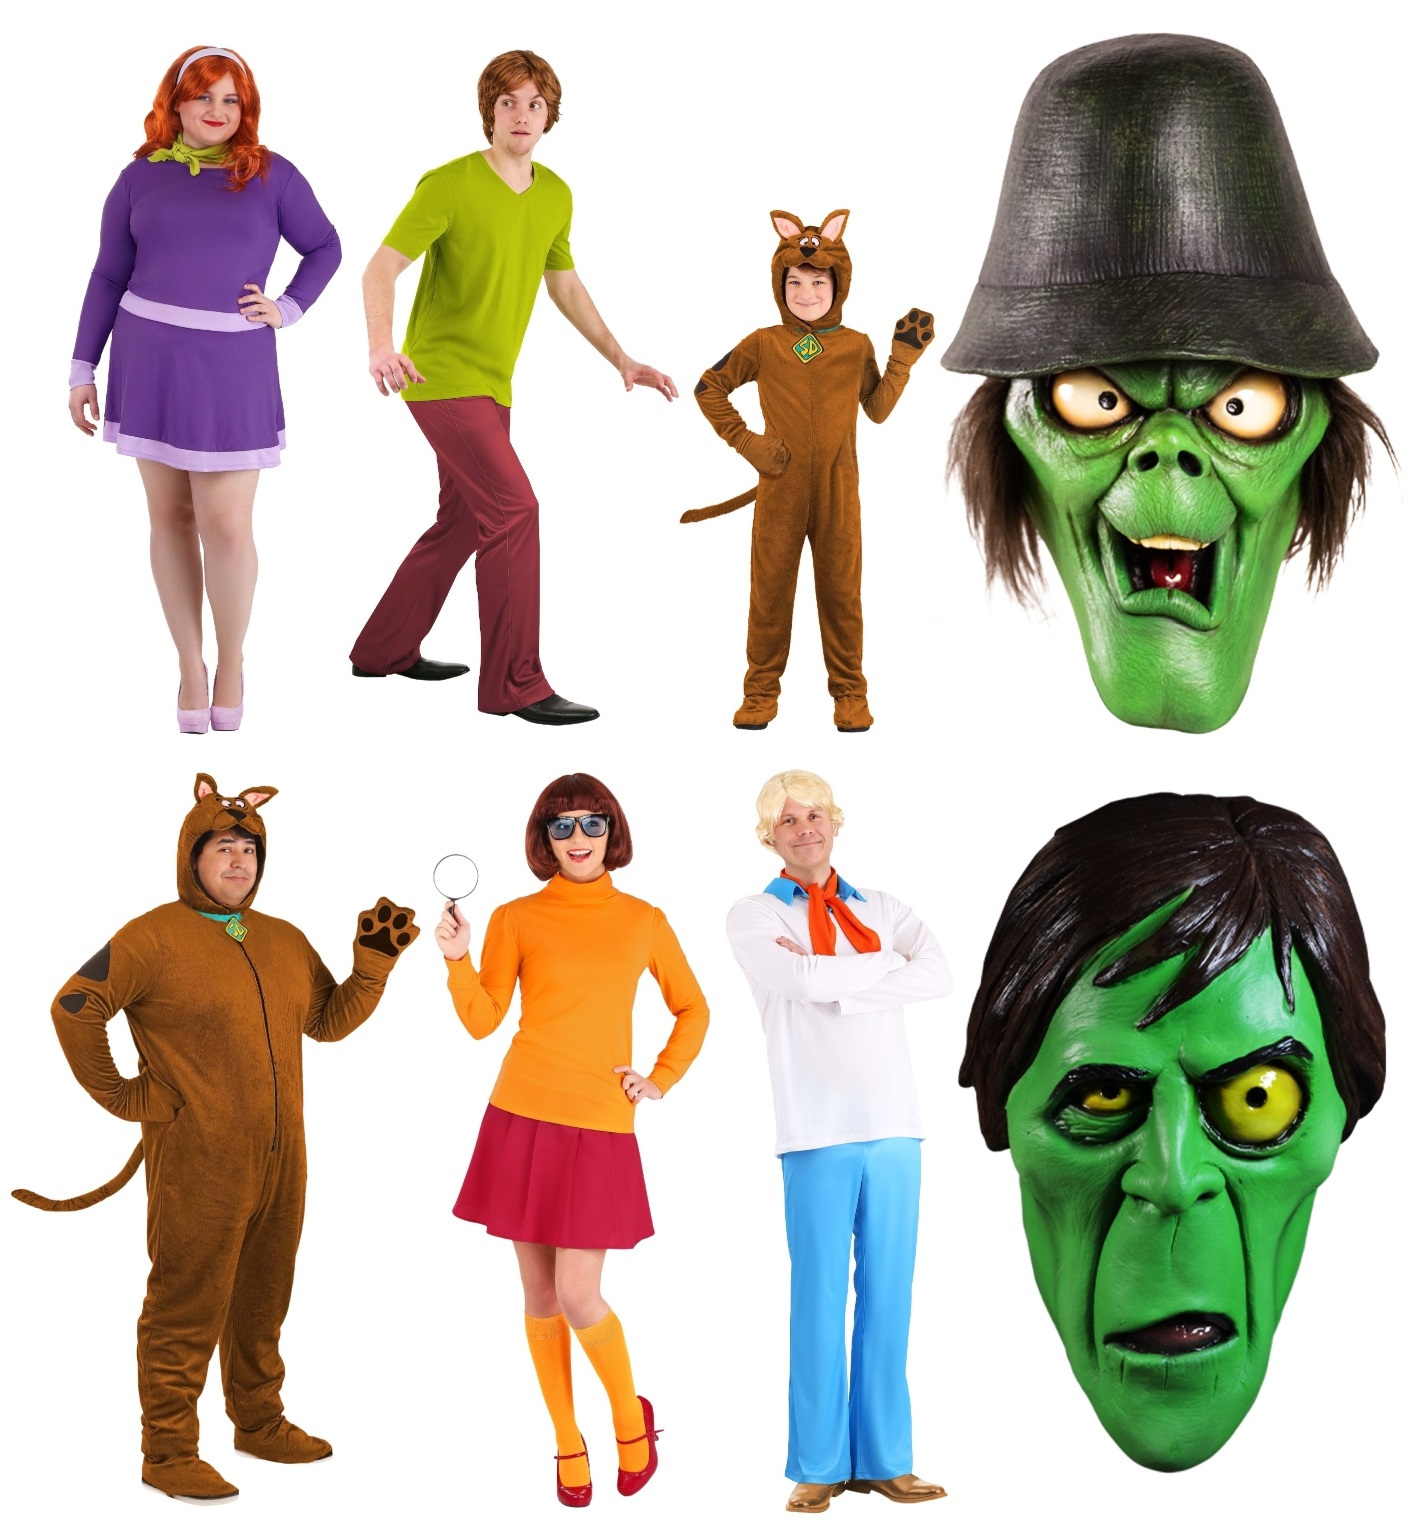 The Ultimate Cartoon Character Costumes for an Animated Saturday Morning [ Costume Guide] - HalloweenCostumes.com Blog